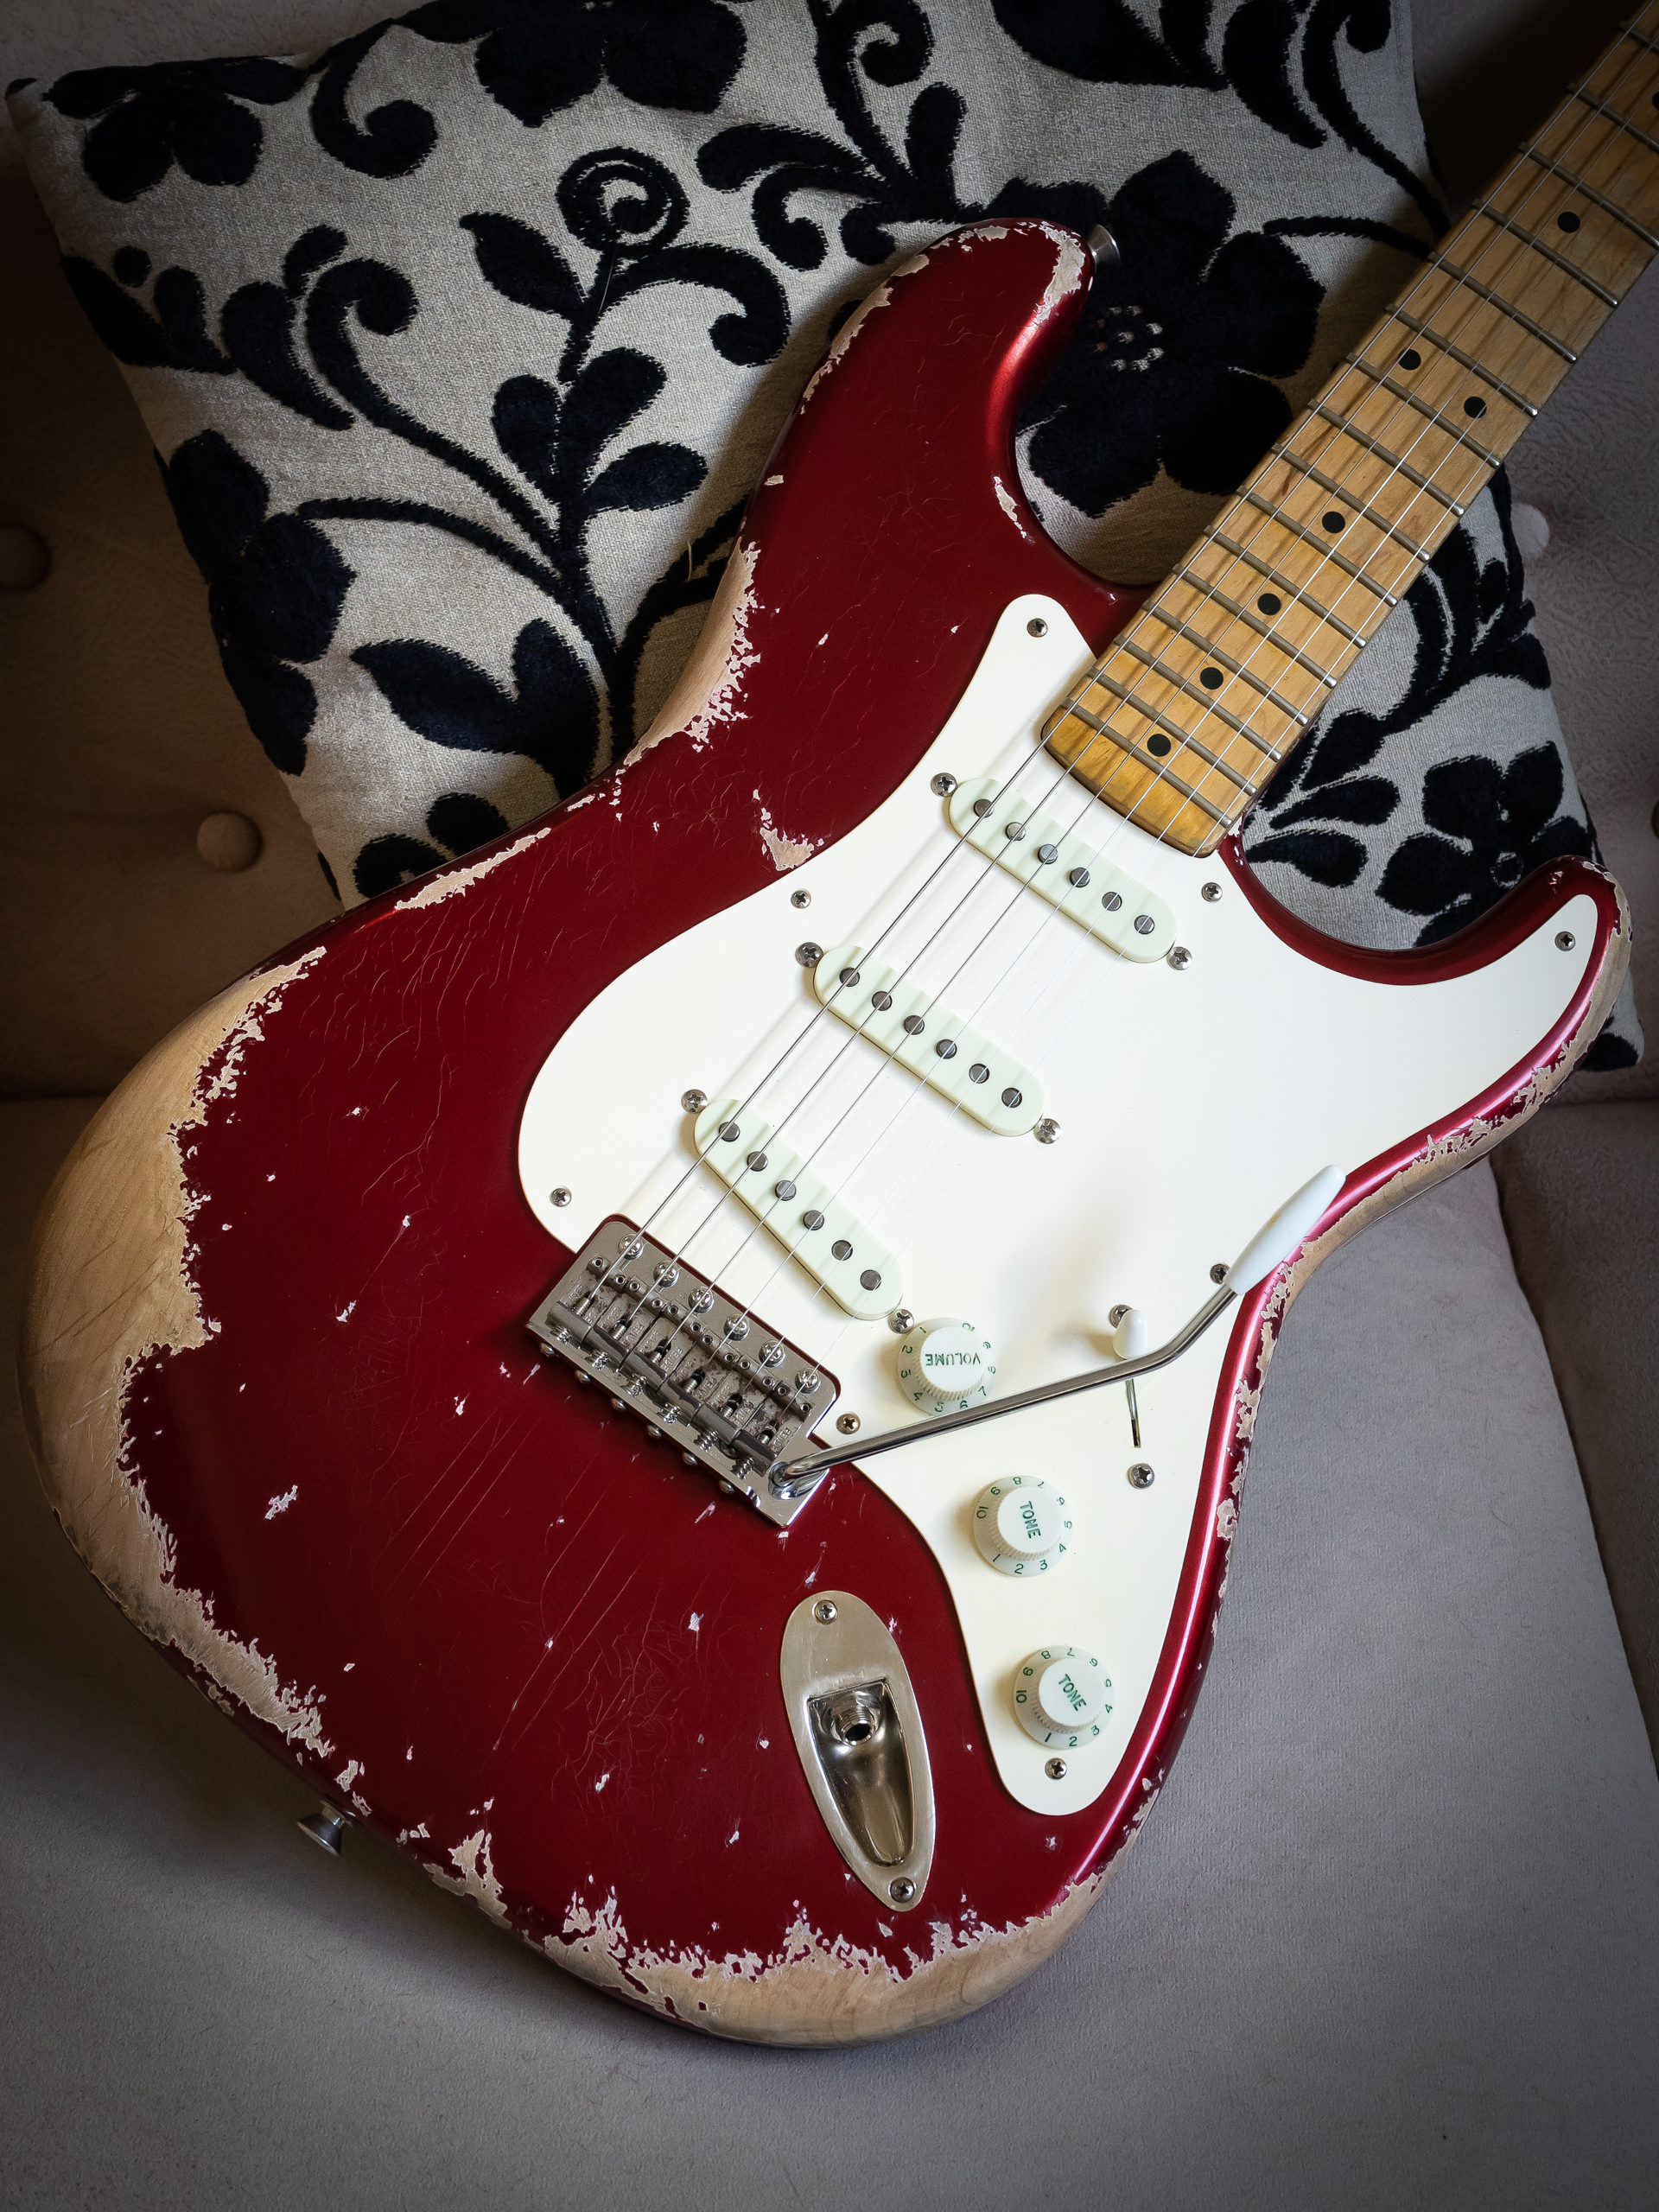 Fender Mexico Stratocaster Jimmy Vaughan MJT candy apple red relic 1956 Custom '54 pickup Custom shop